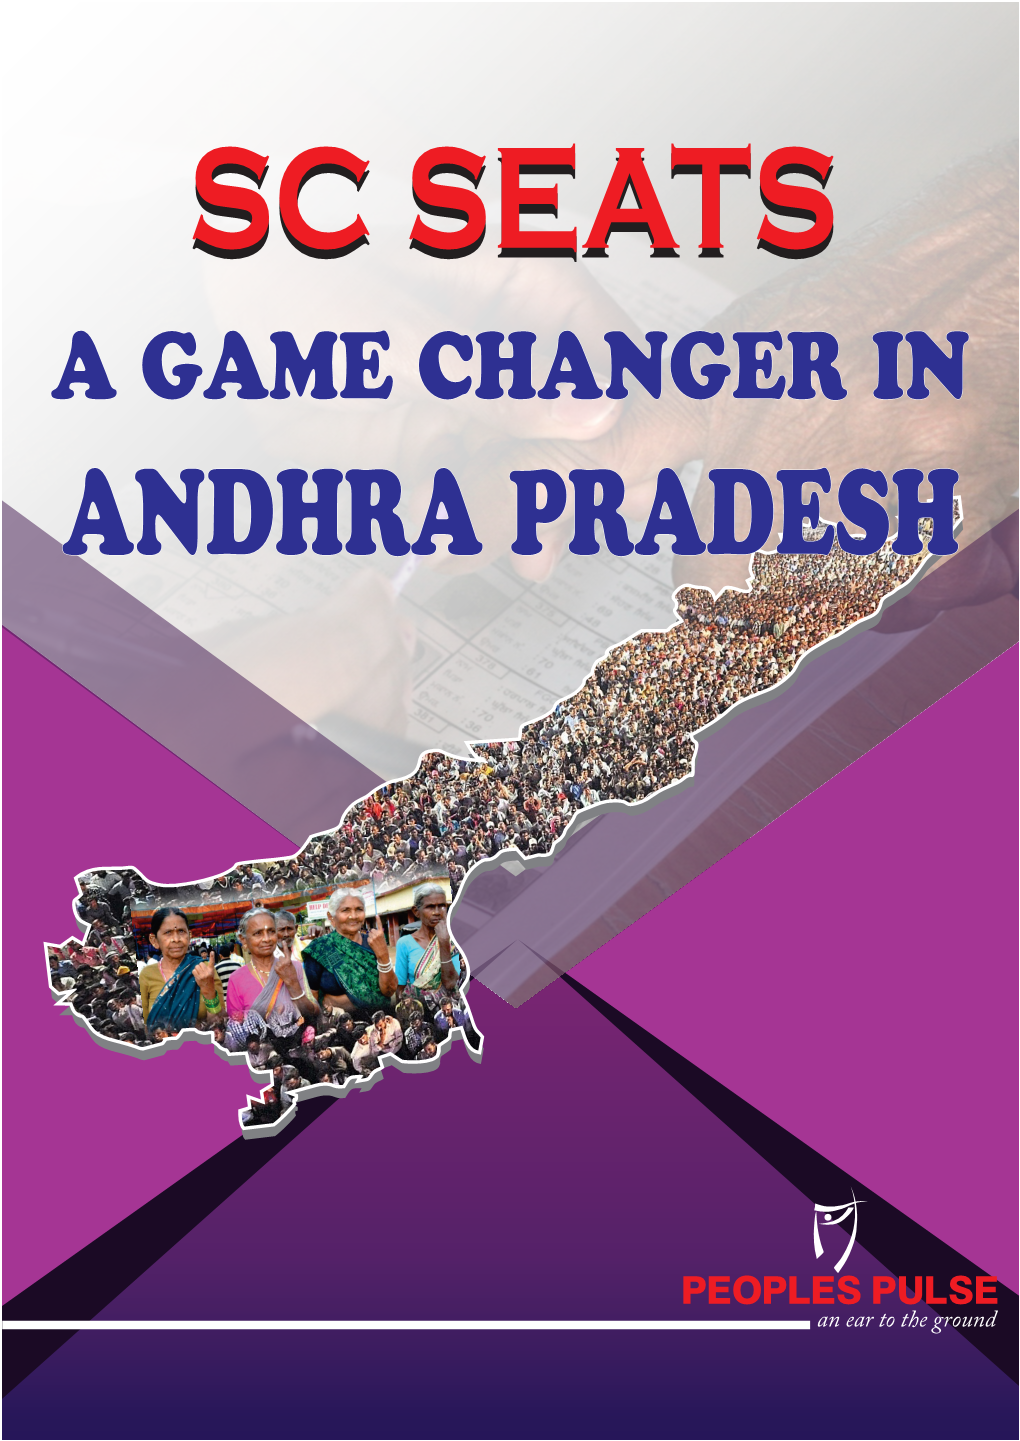 SC SEATS GAME CHANGER in AP.Pmd